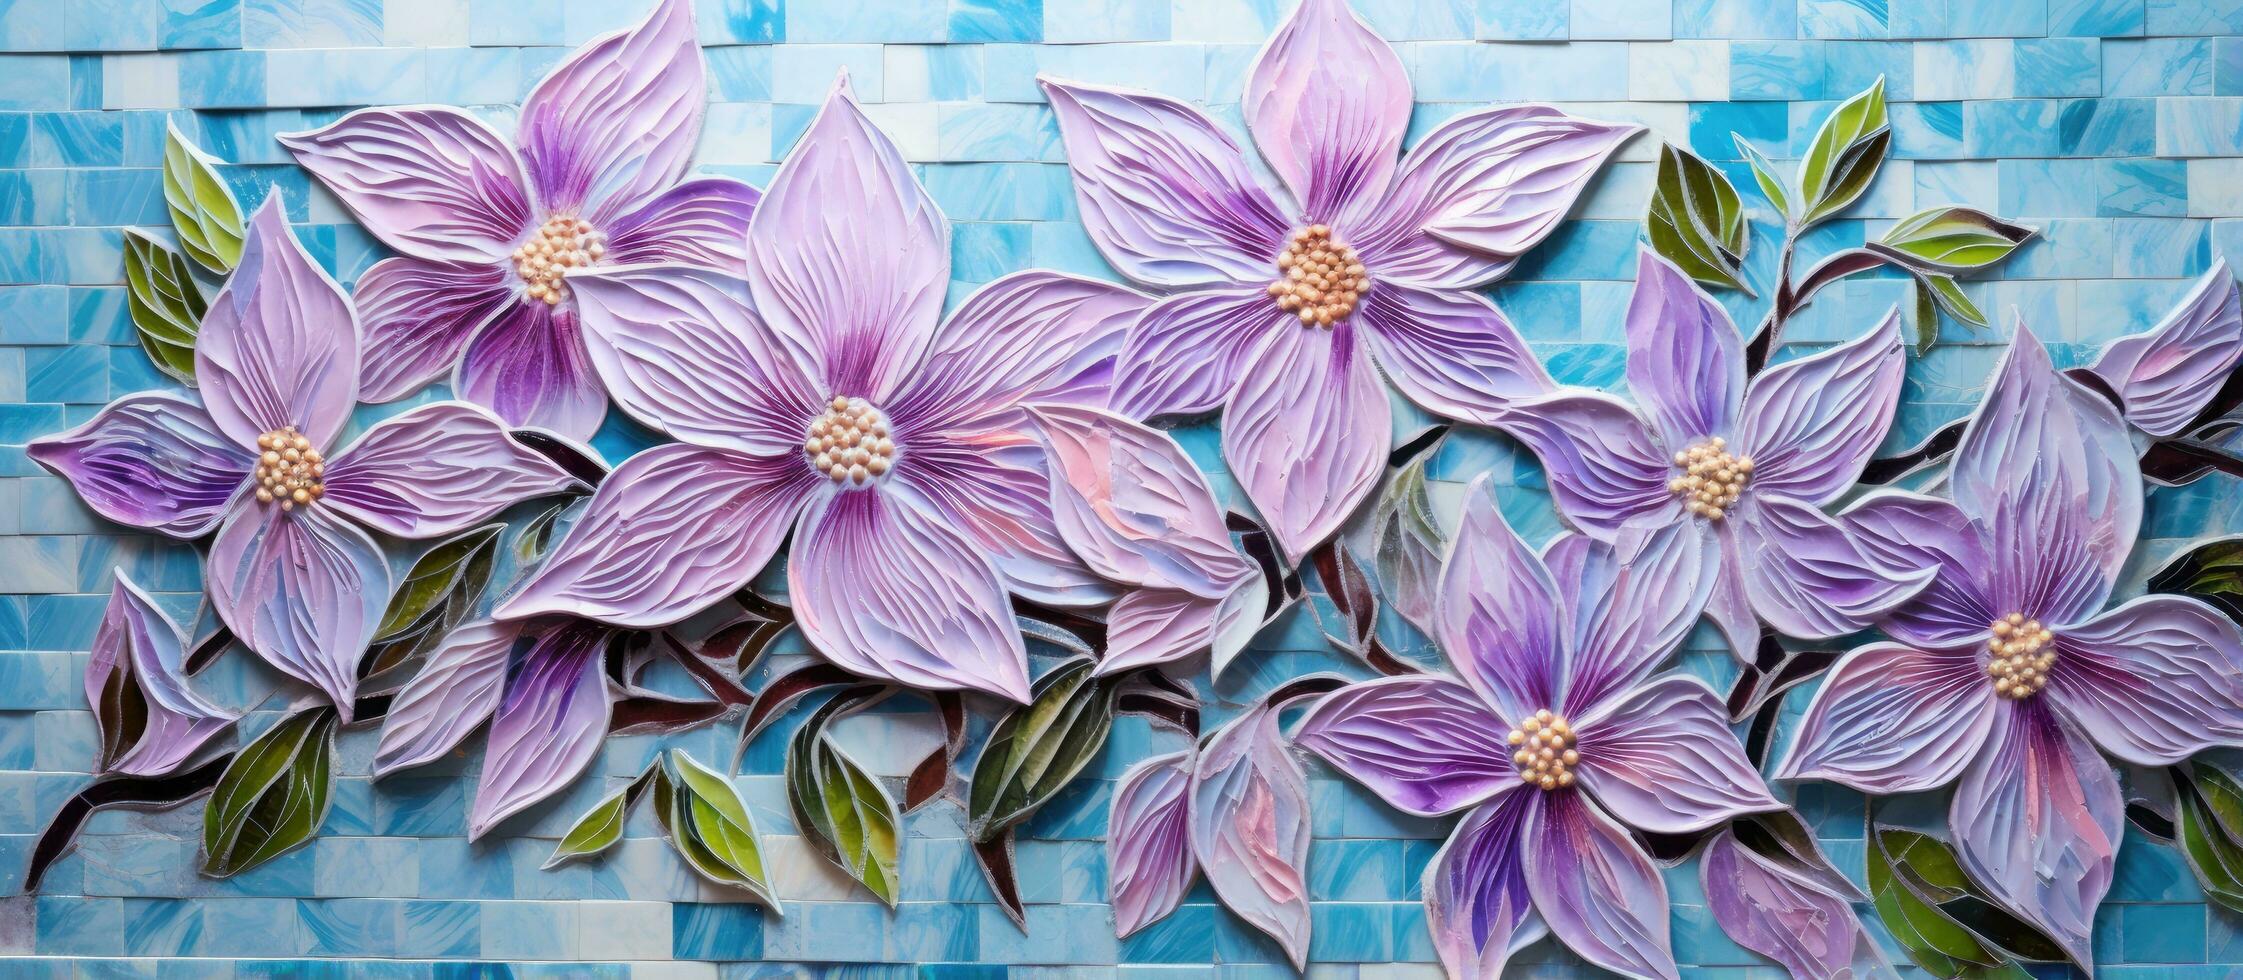 Mosaic clematis flower on handmade tile wall for interior design photo